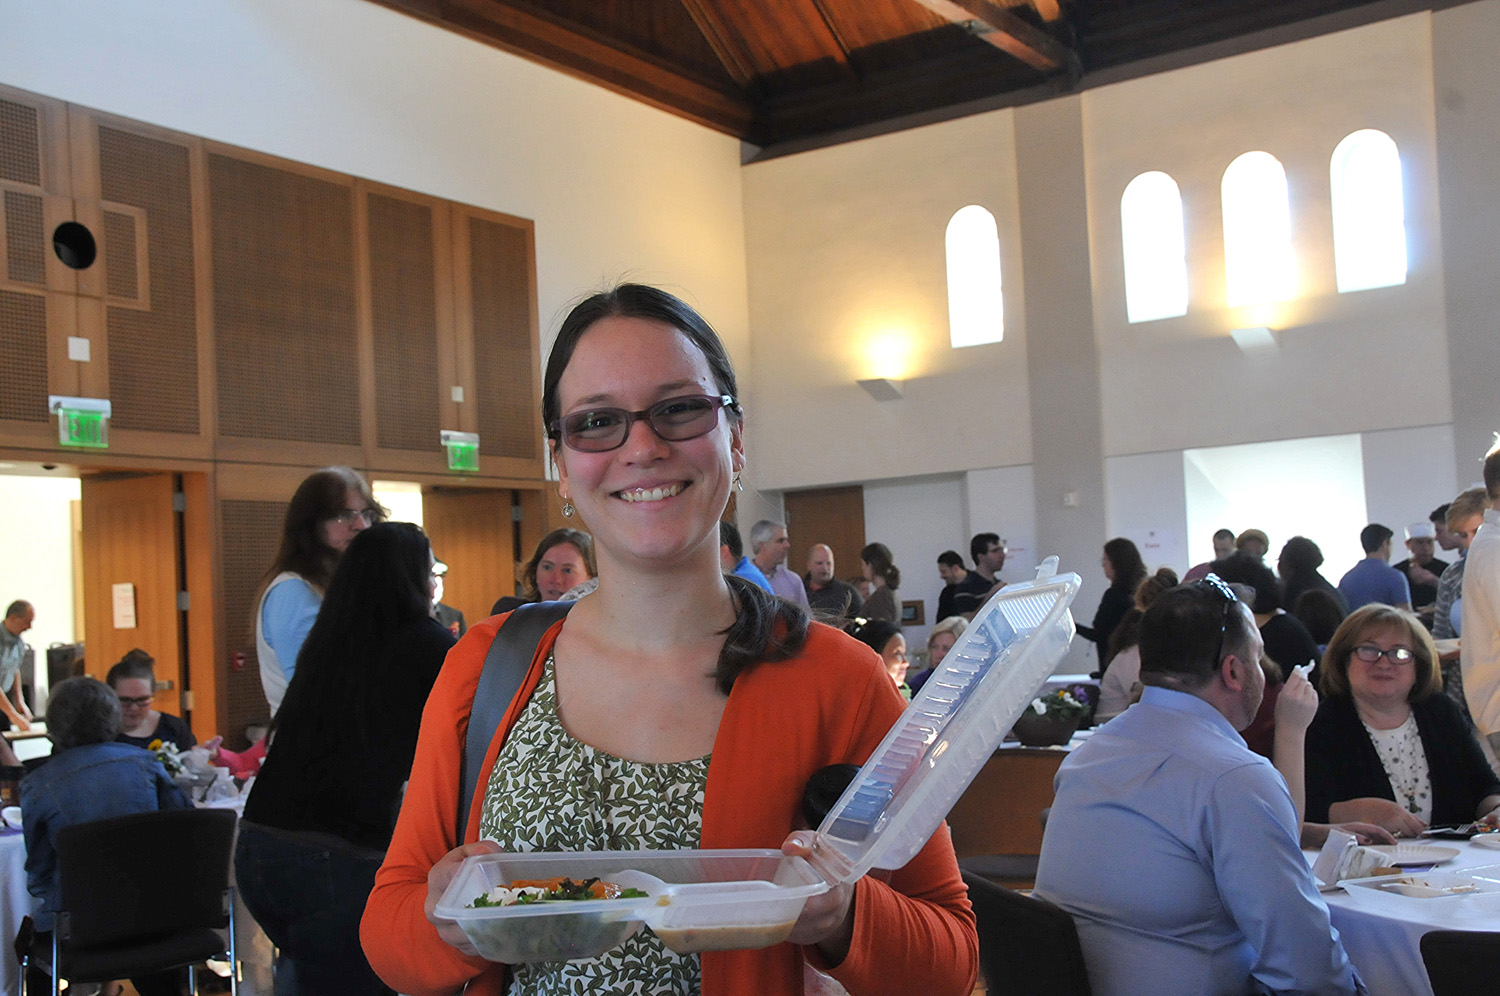 Sustainability Director Jennifer Kleindienst collected food in a reusable clamshell container, part of Wesleyan's sustainability efforts to reduce waste.